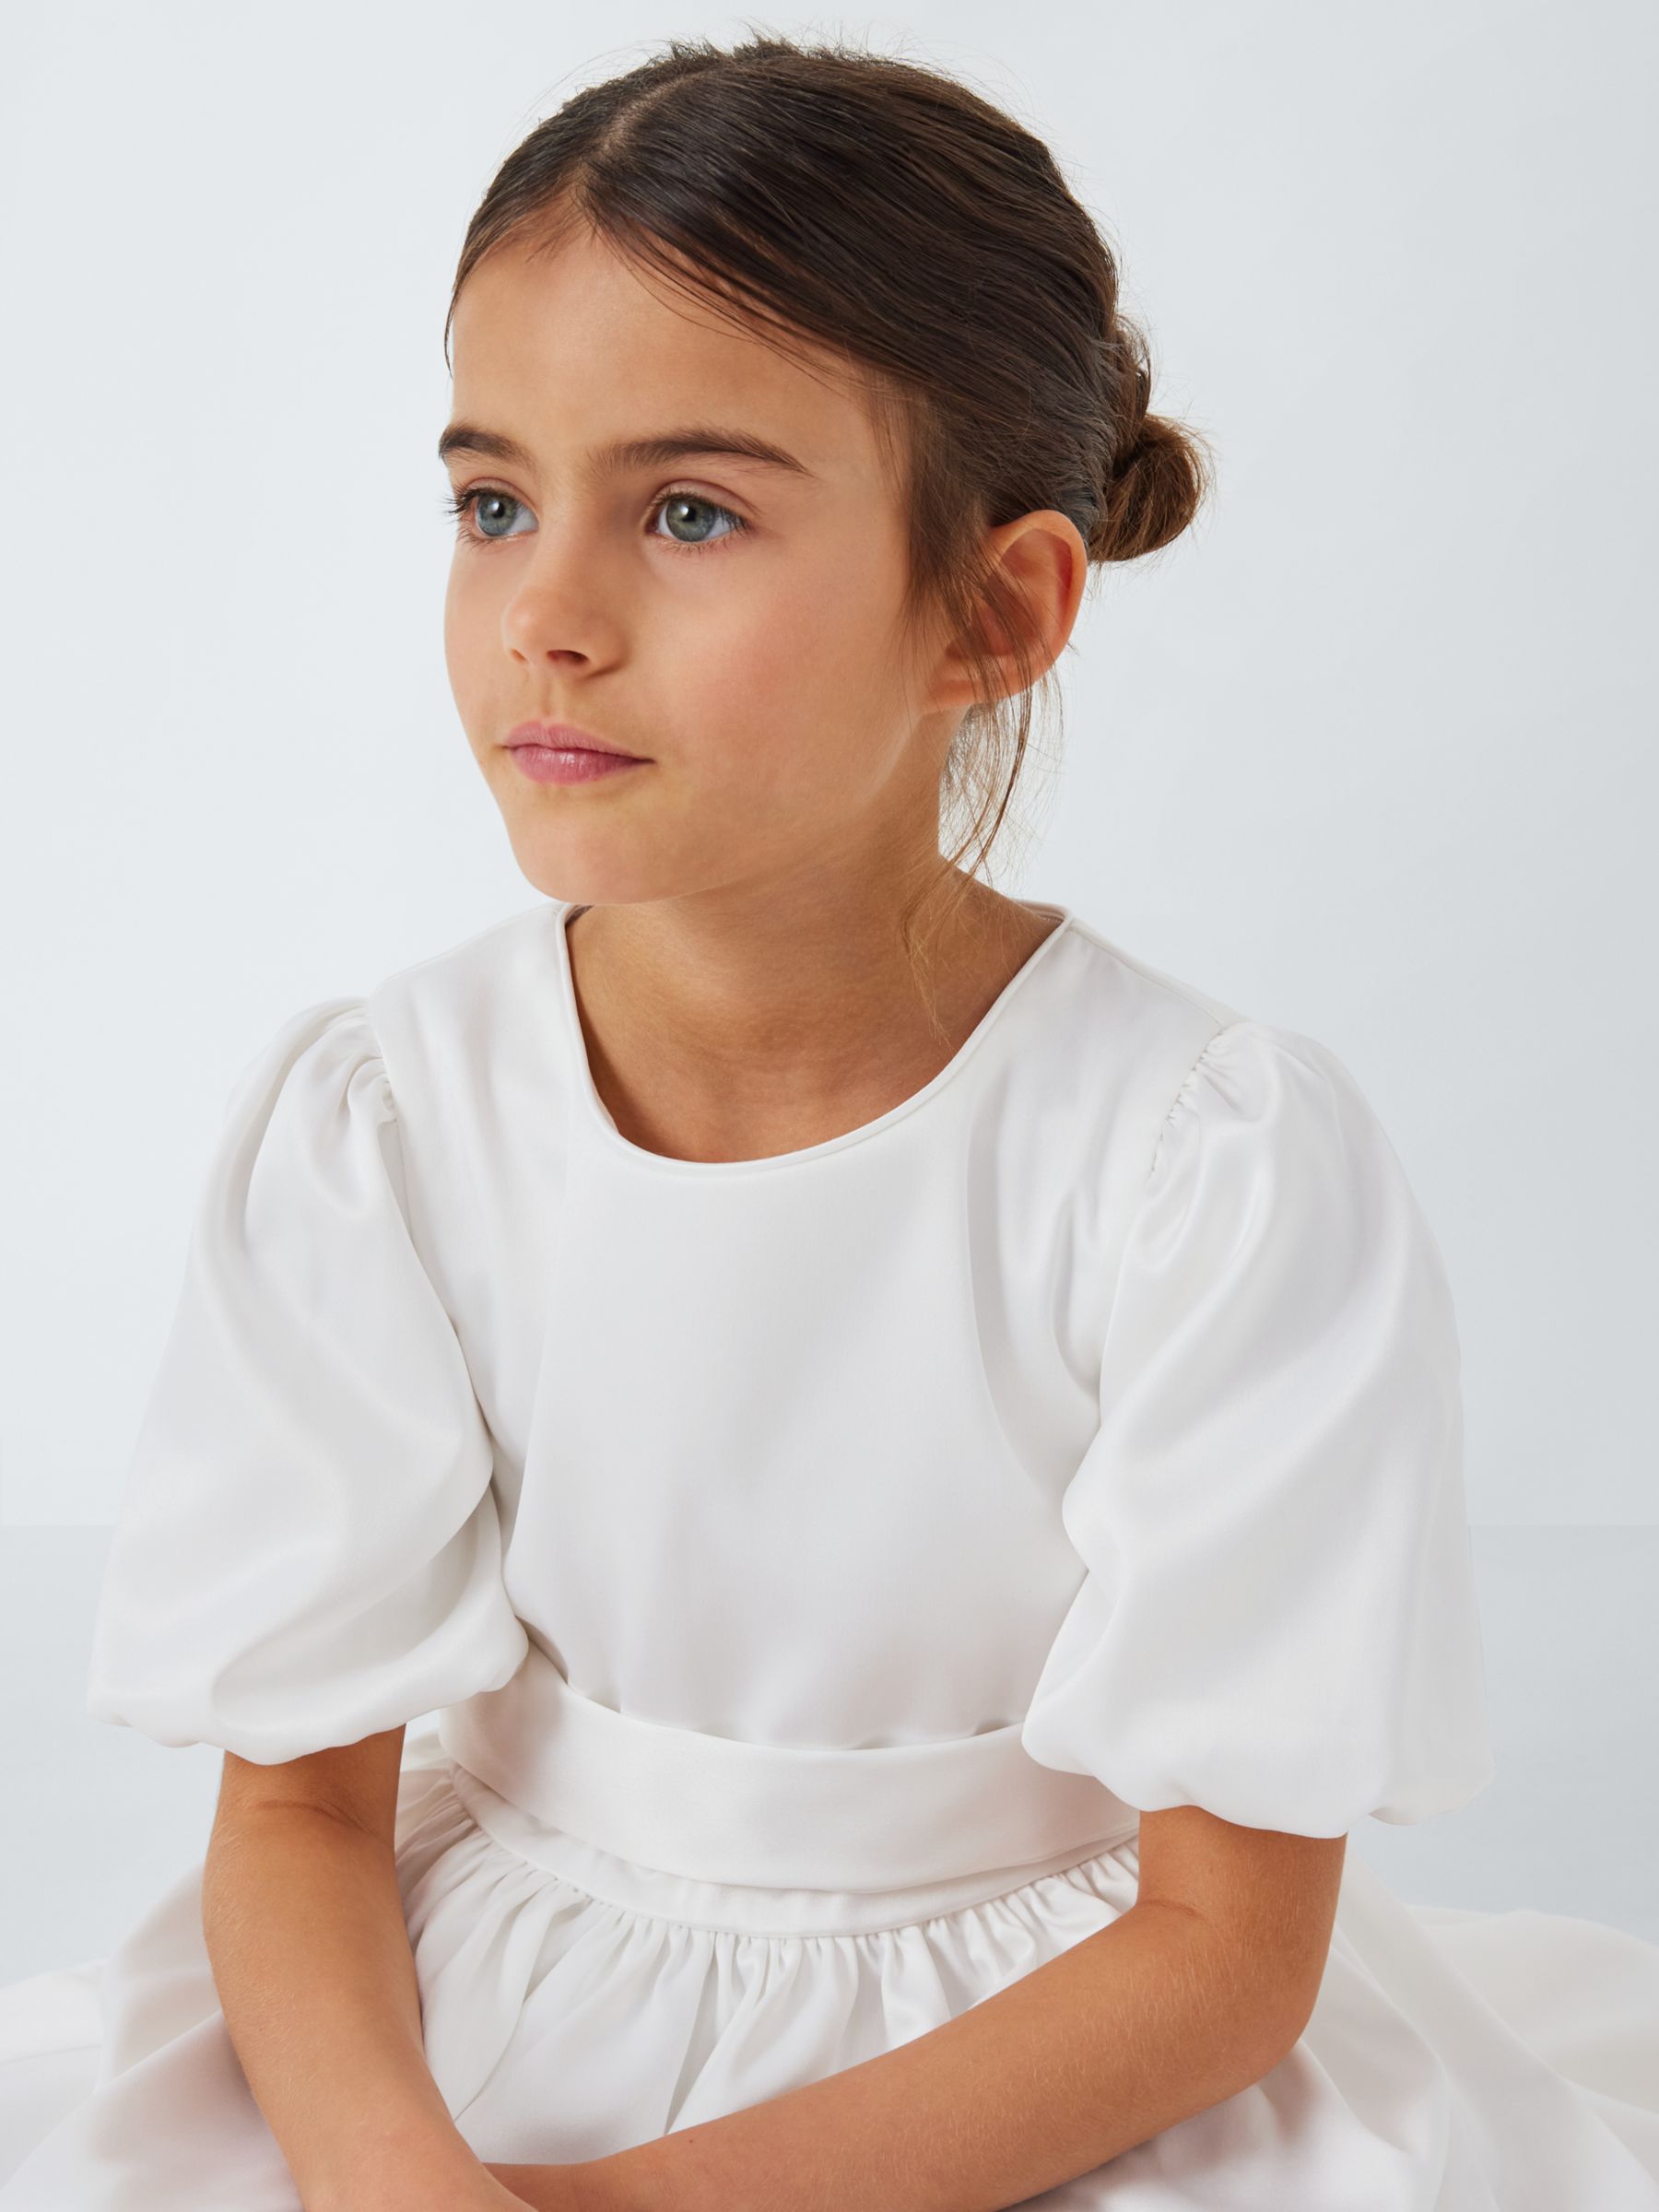 John Lewis Heirloom Collection Kids' Bow Bridesmaid Dress, Ivory, 8 years